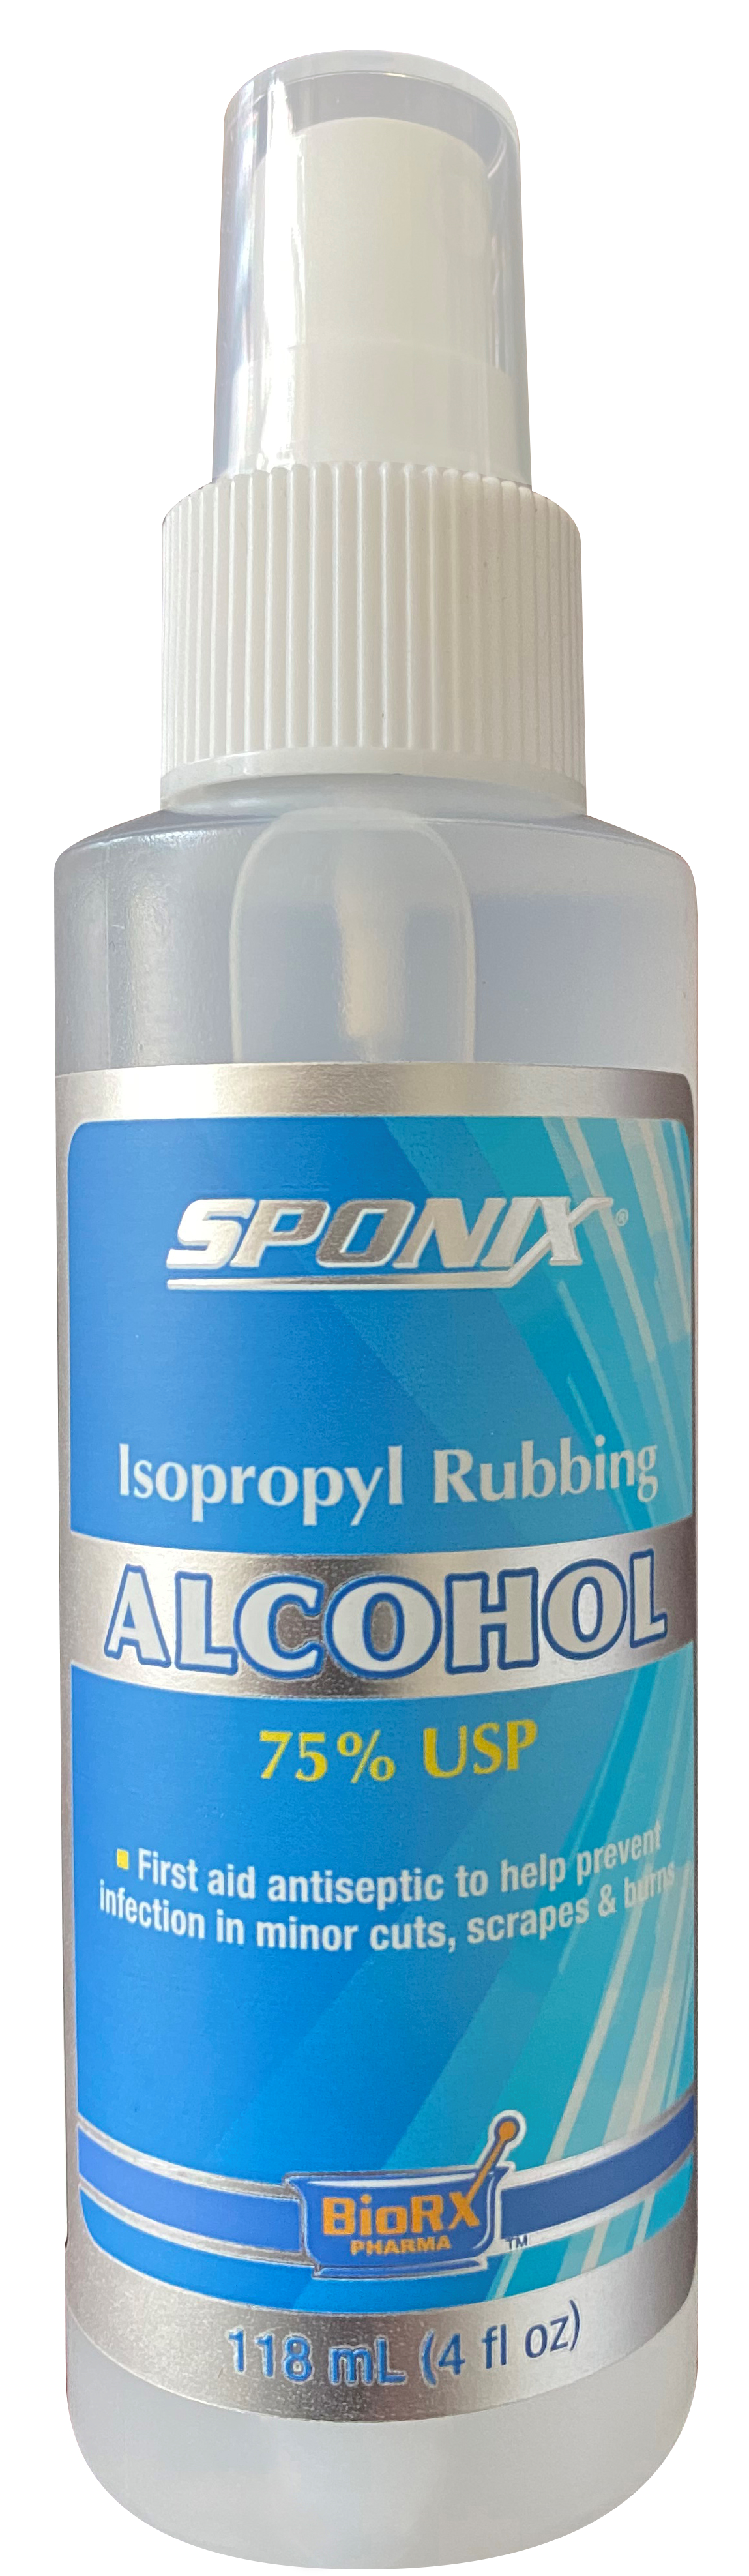 ISO Alcohol 75% Spray 4 OZ - Pack of 6 bottles [ALC400006] - $19.99 :  Discount Pharmacy Supplies, Vial Bottle, Rx Bag, Rx Folder, Wholesale  Pharmacy Supplies